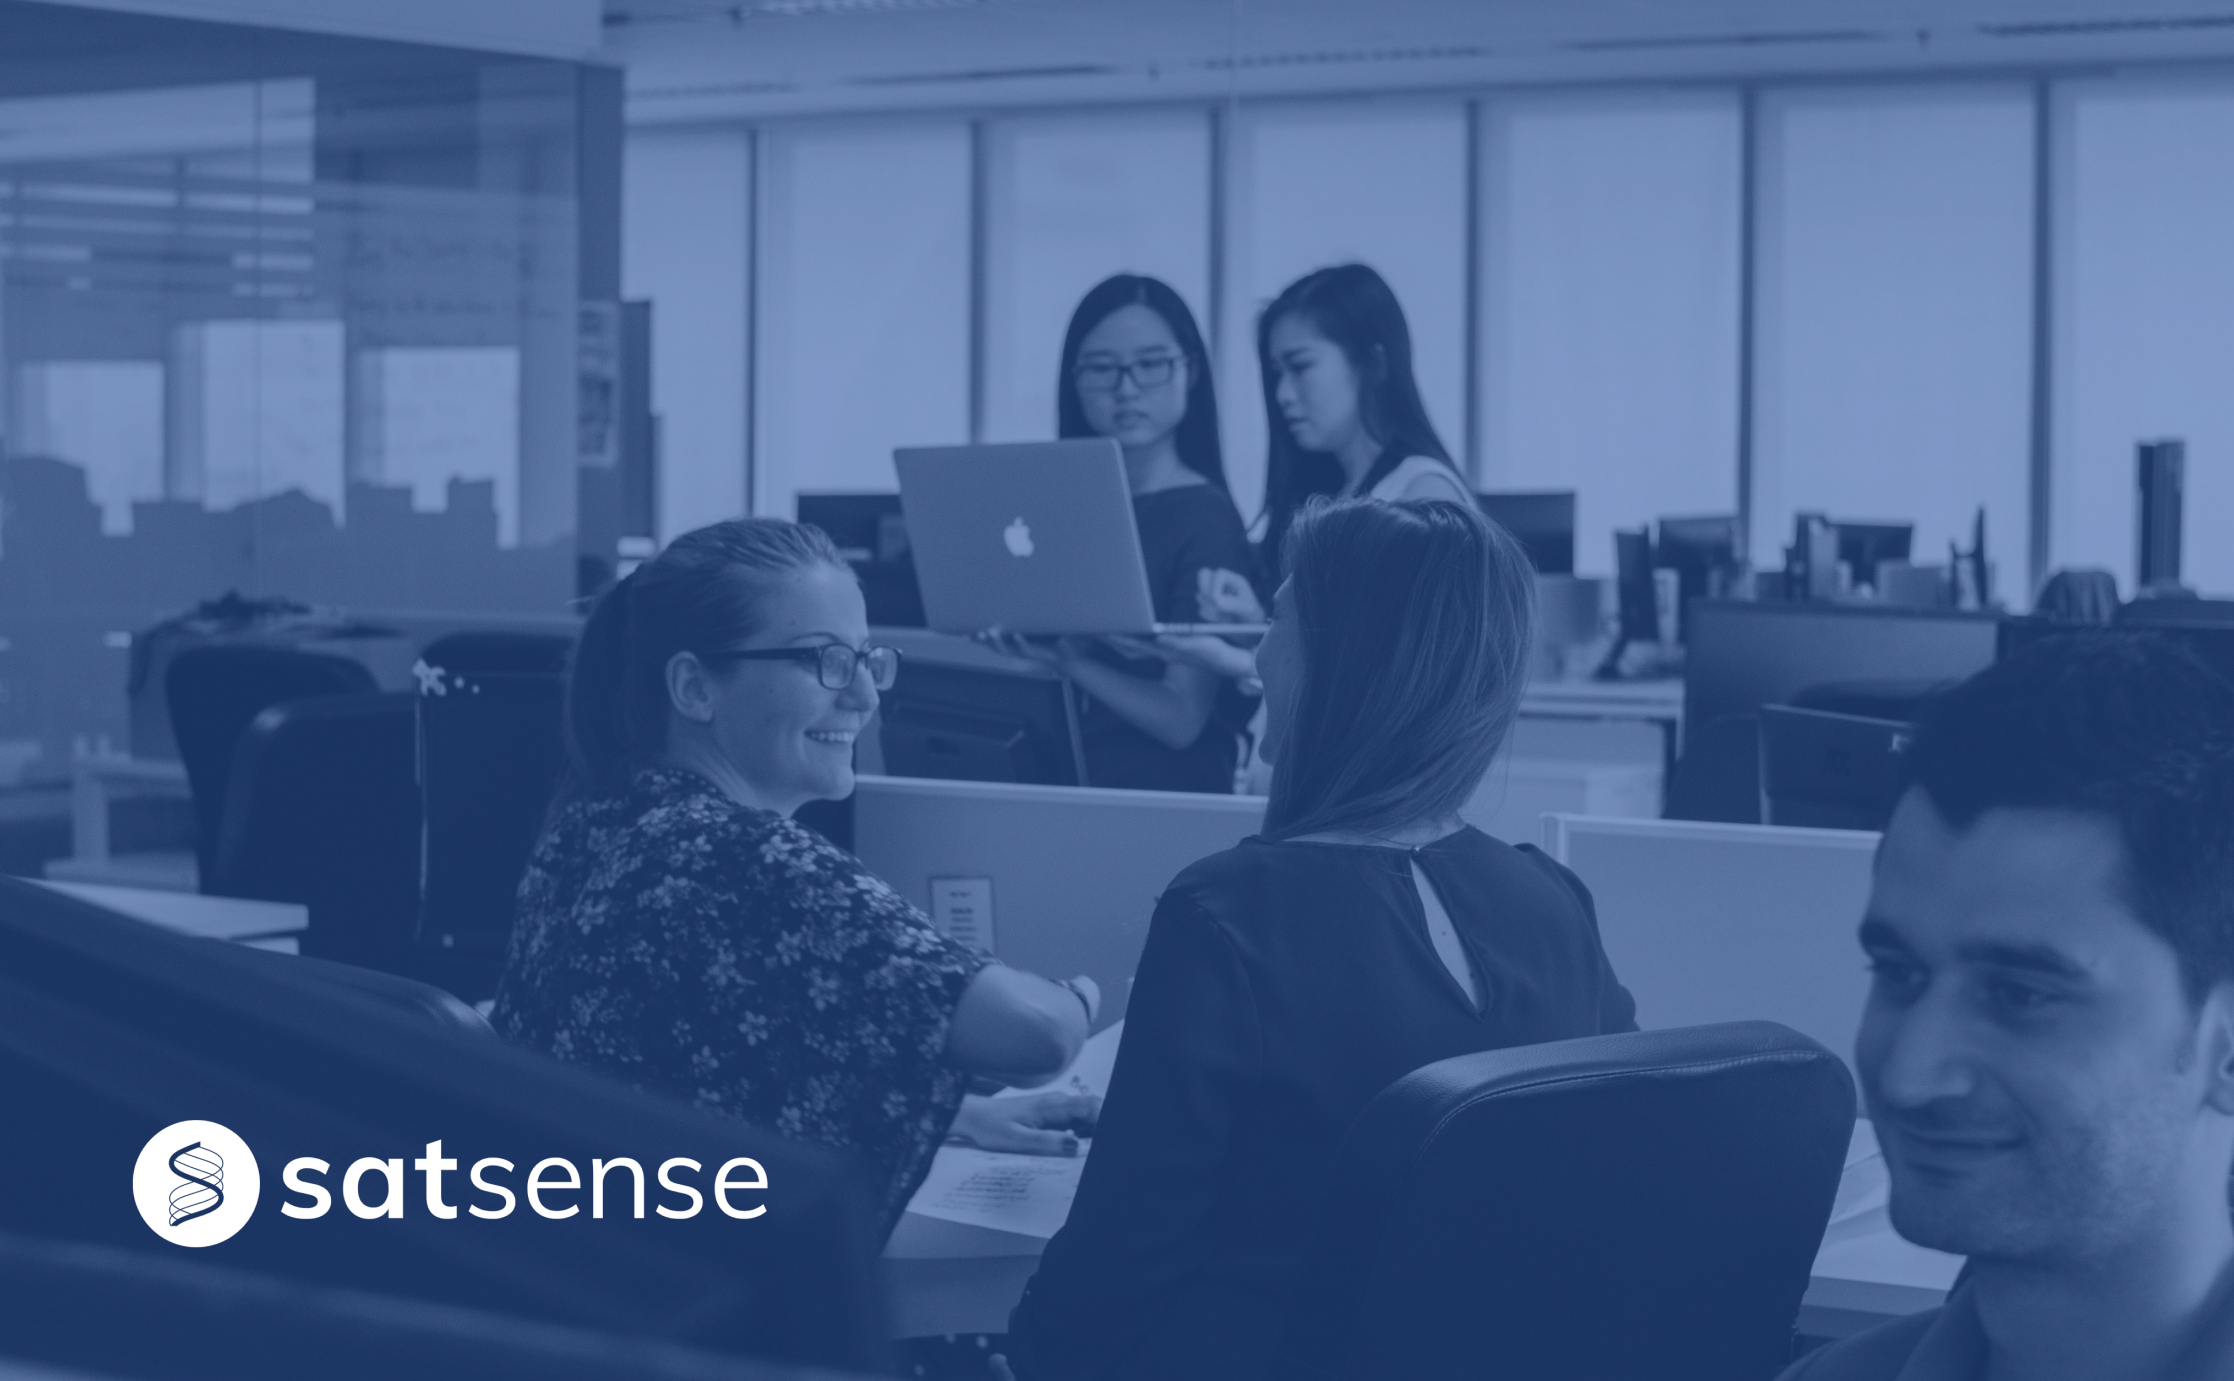 SatSense team in the office